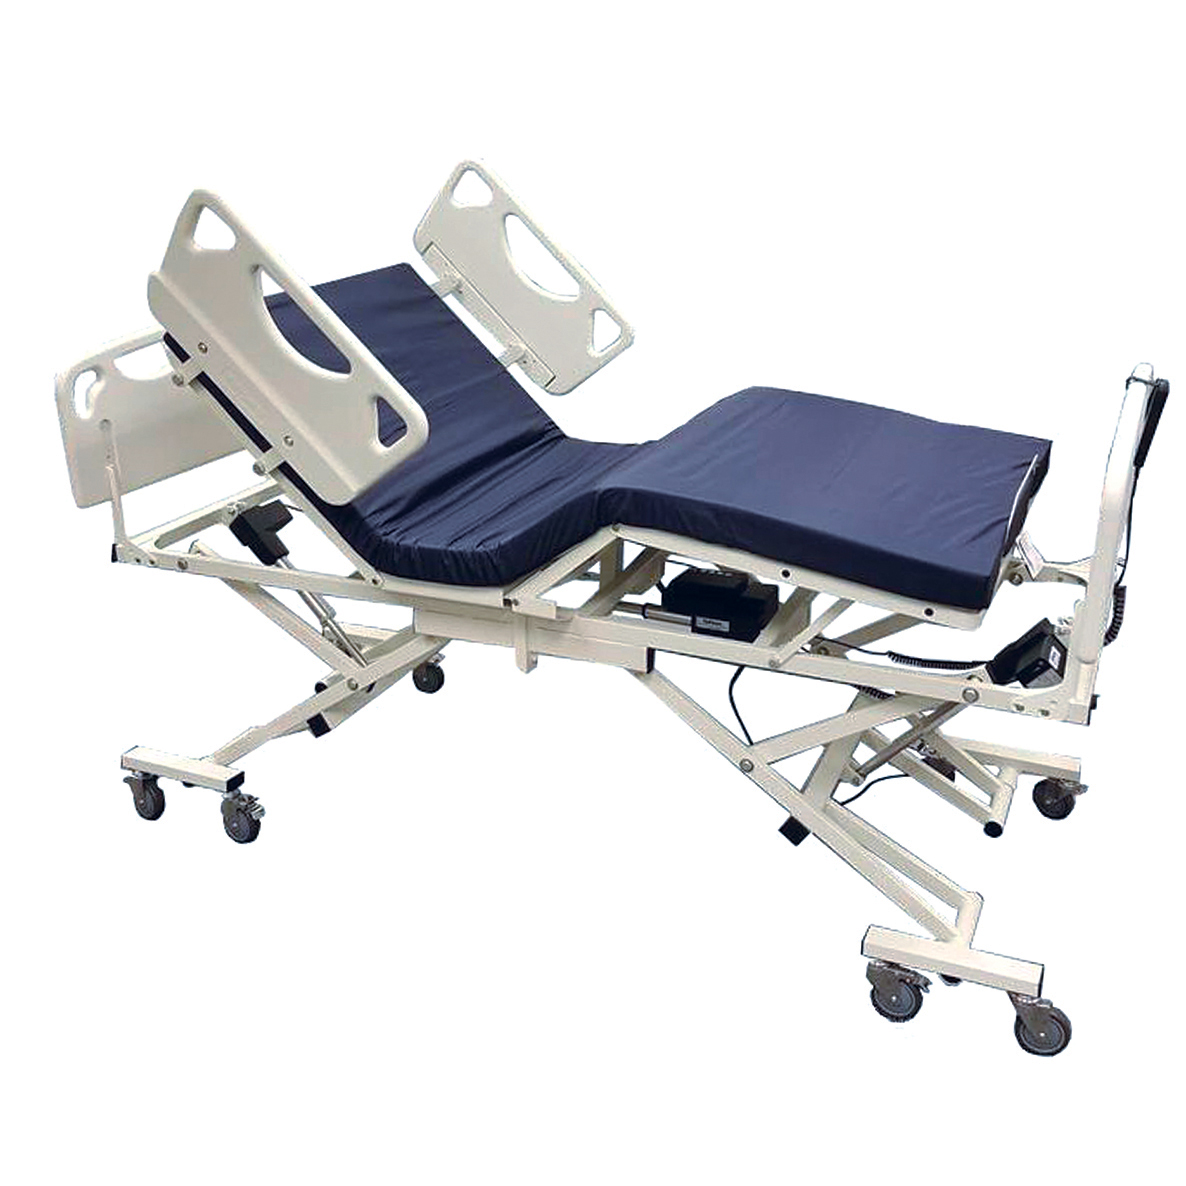 Anaheim heavy duty extra wide large bariatric adjustable hospital bed